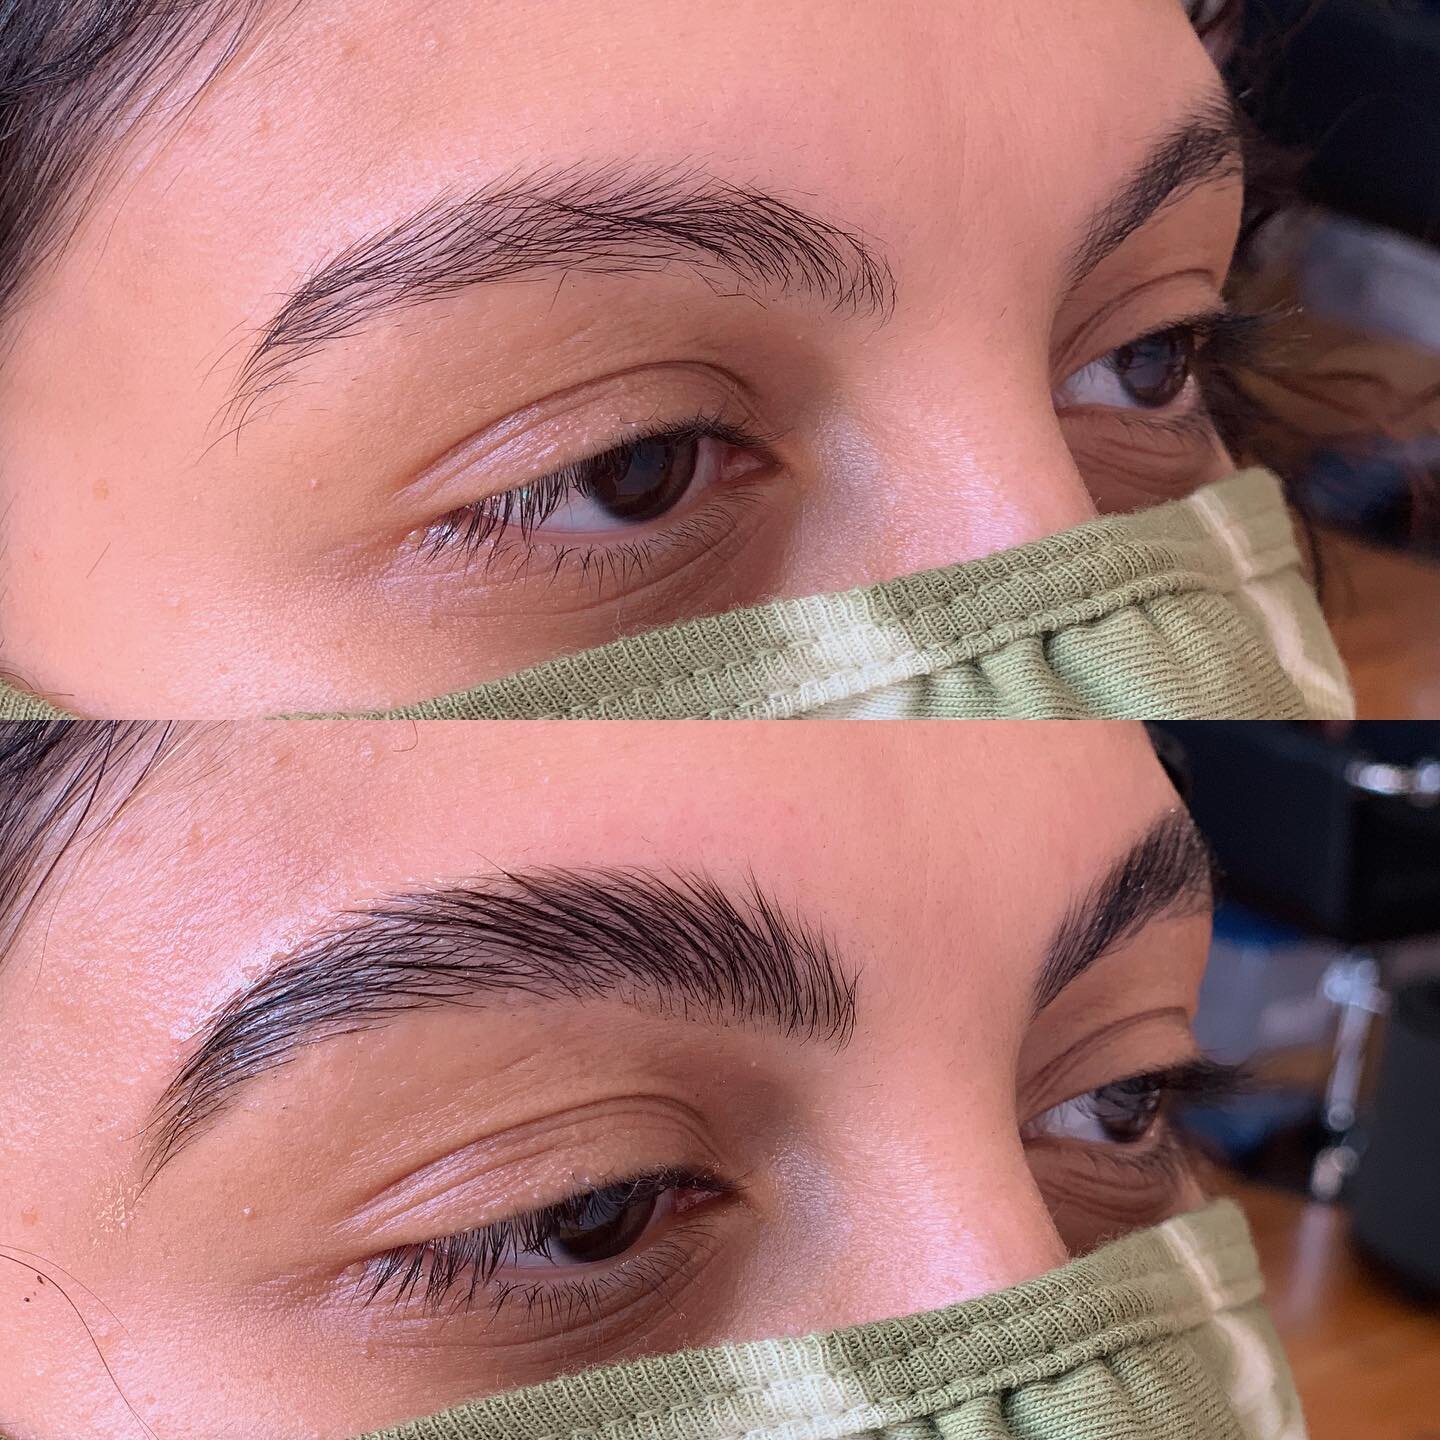 I love doing laminations so much!! 🥰 Thanks for coming in @elizabethsaavedra__ 
.
.
.

#brows #browlamination #chicagobrows #browartist #browlift #fluffybrows #boybrow #nowopen #fixhairstudio #nowtrending #newbrows #newbrowswhodis #glowupseason #bea